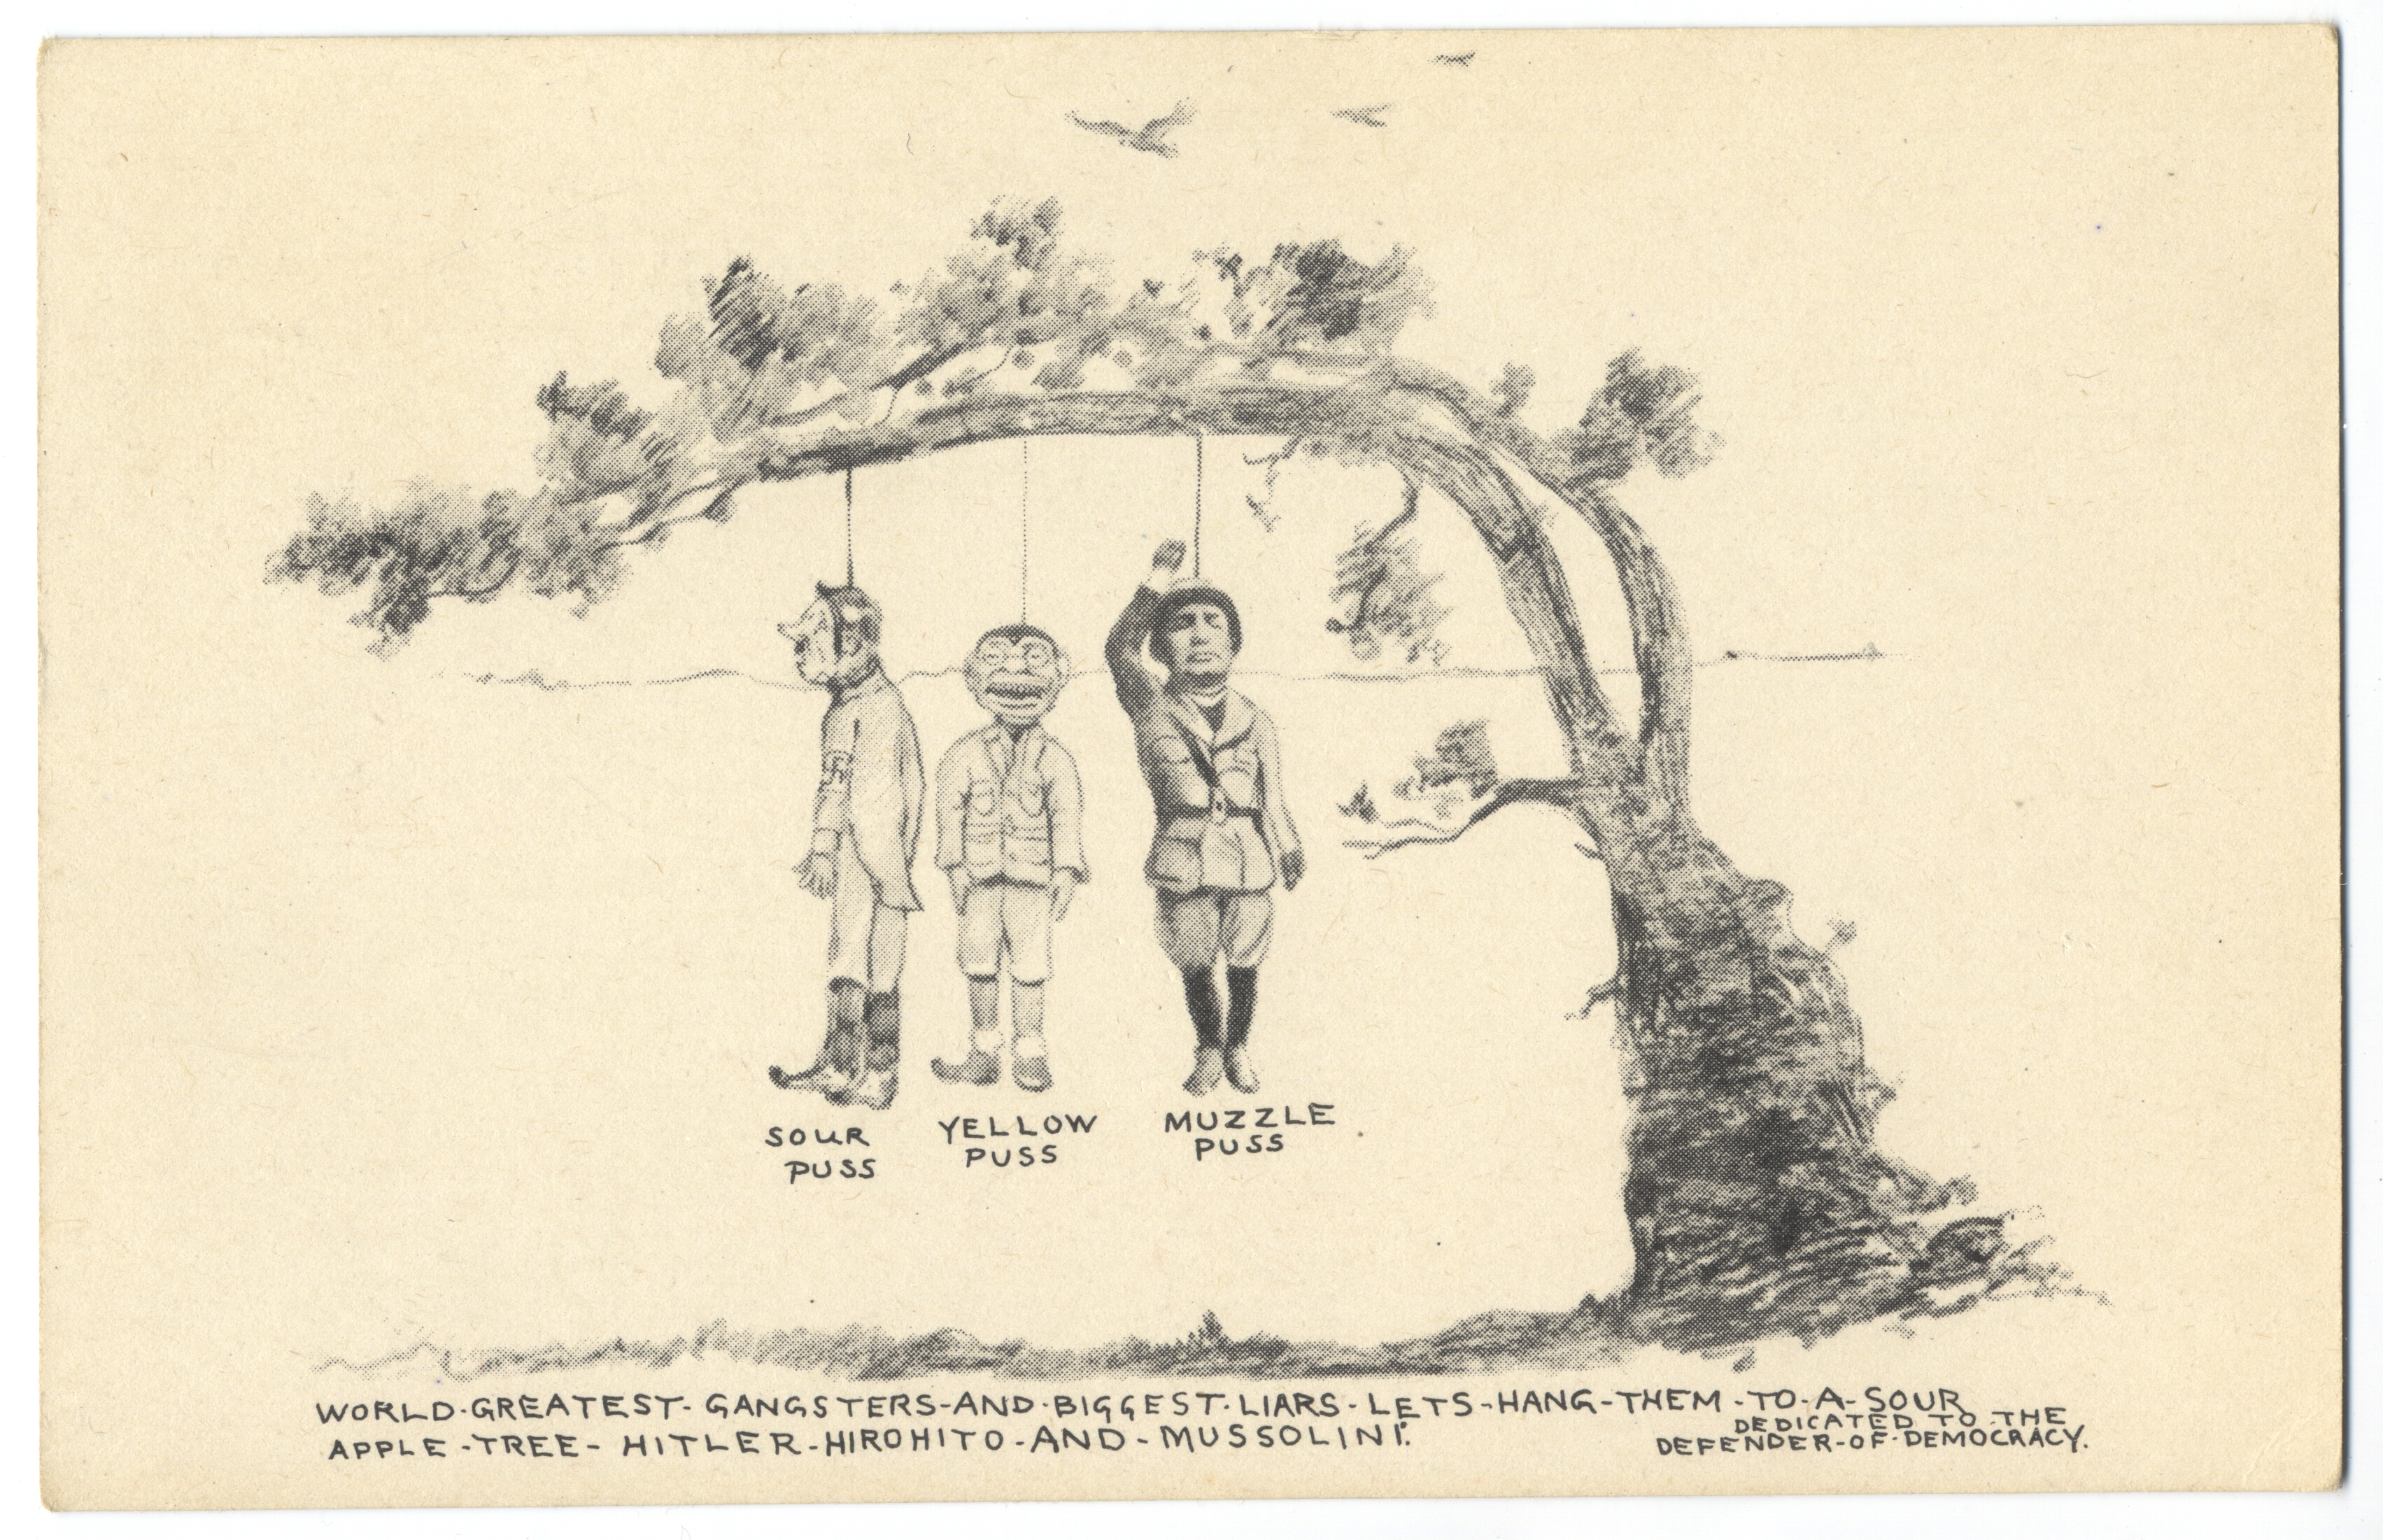 Sketched drawing of three figures hanging from tree, including Hitler (named as Sour Puss), Hirohito (named as Yellow Puss), and Mussolini (named as Muzzle Puss)